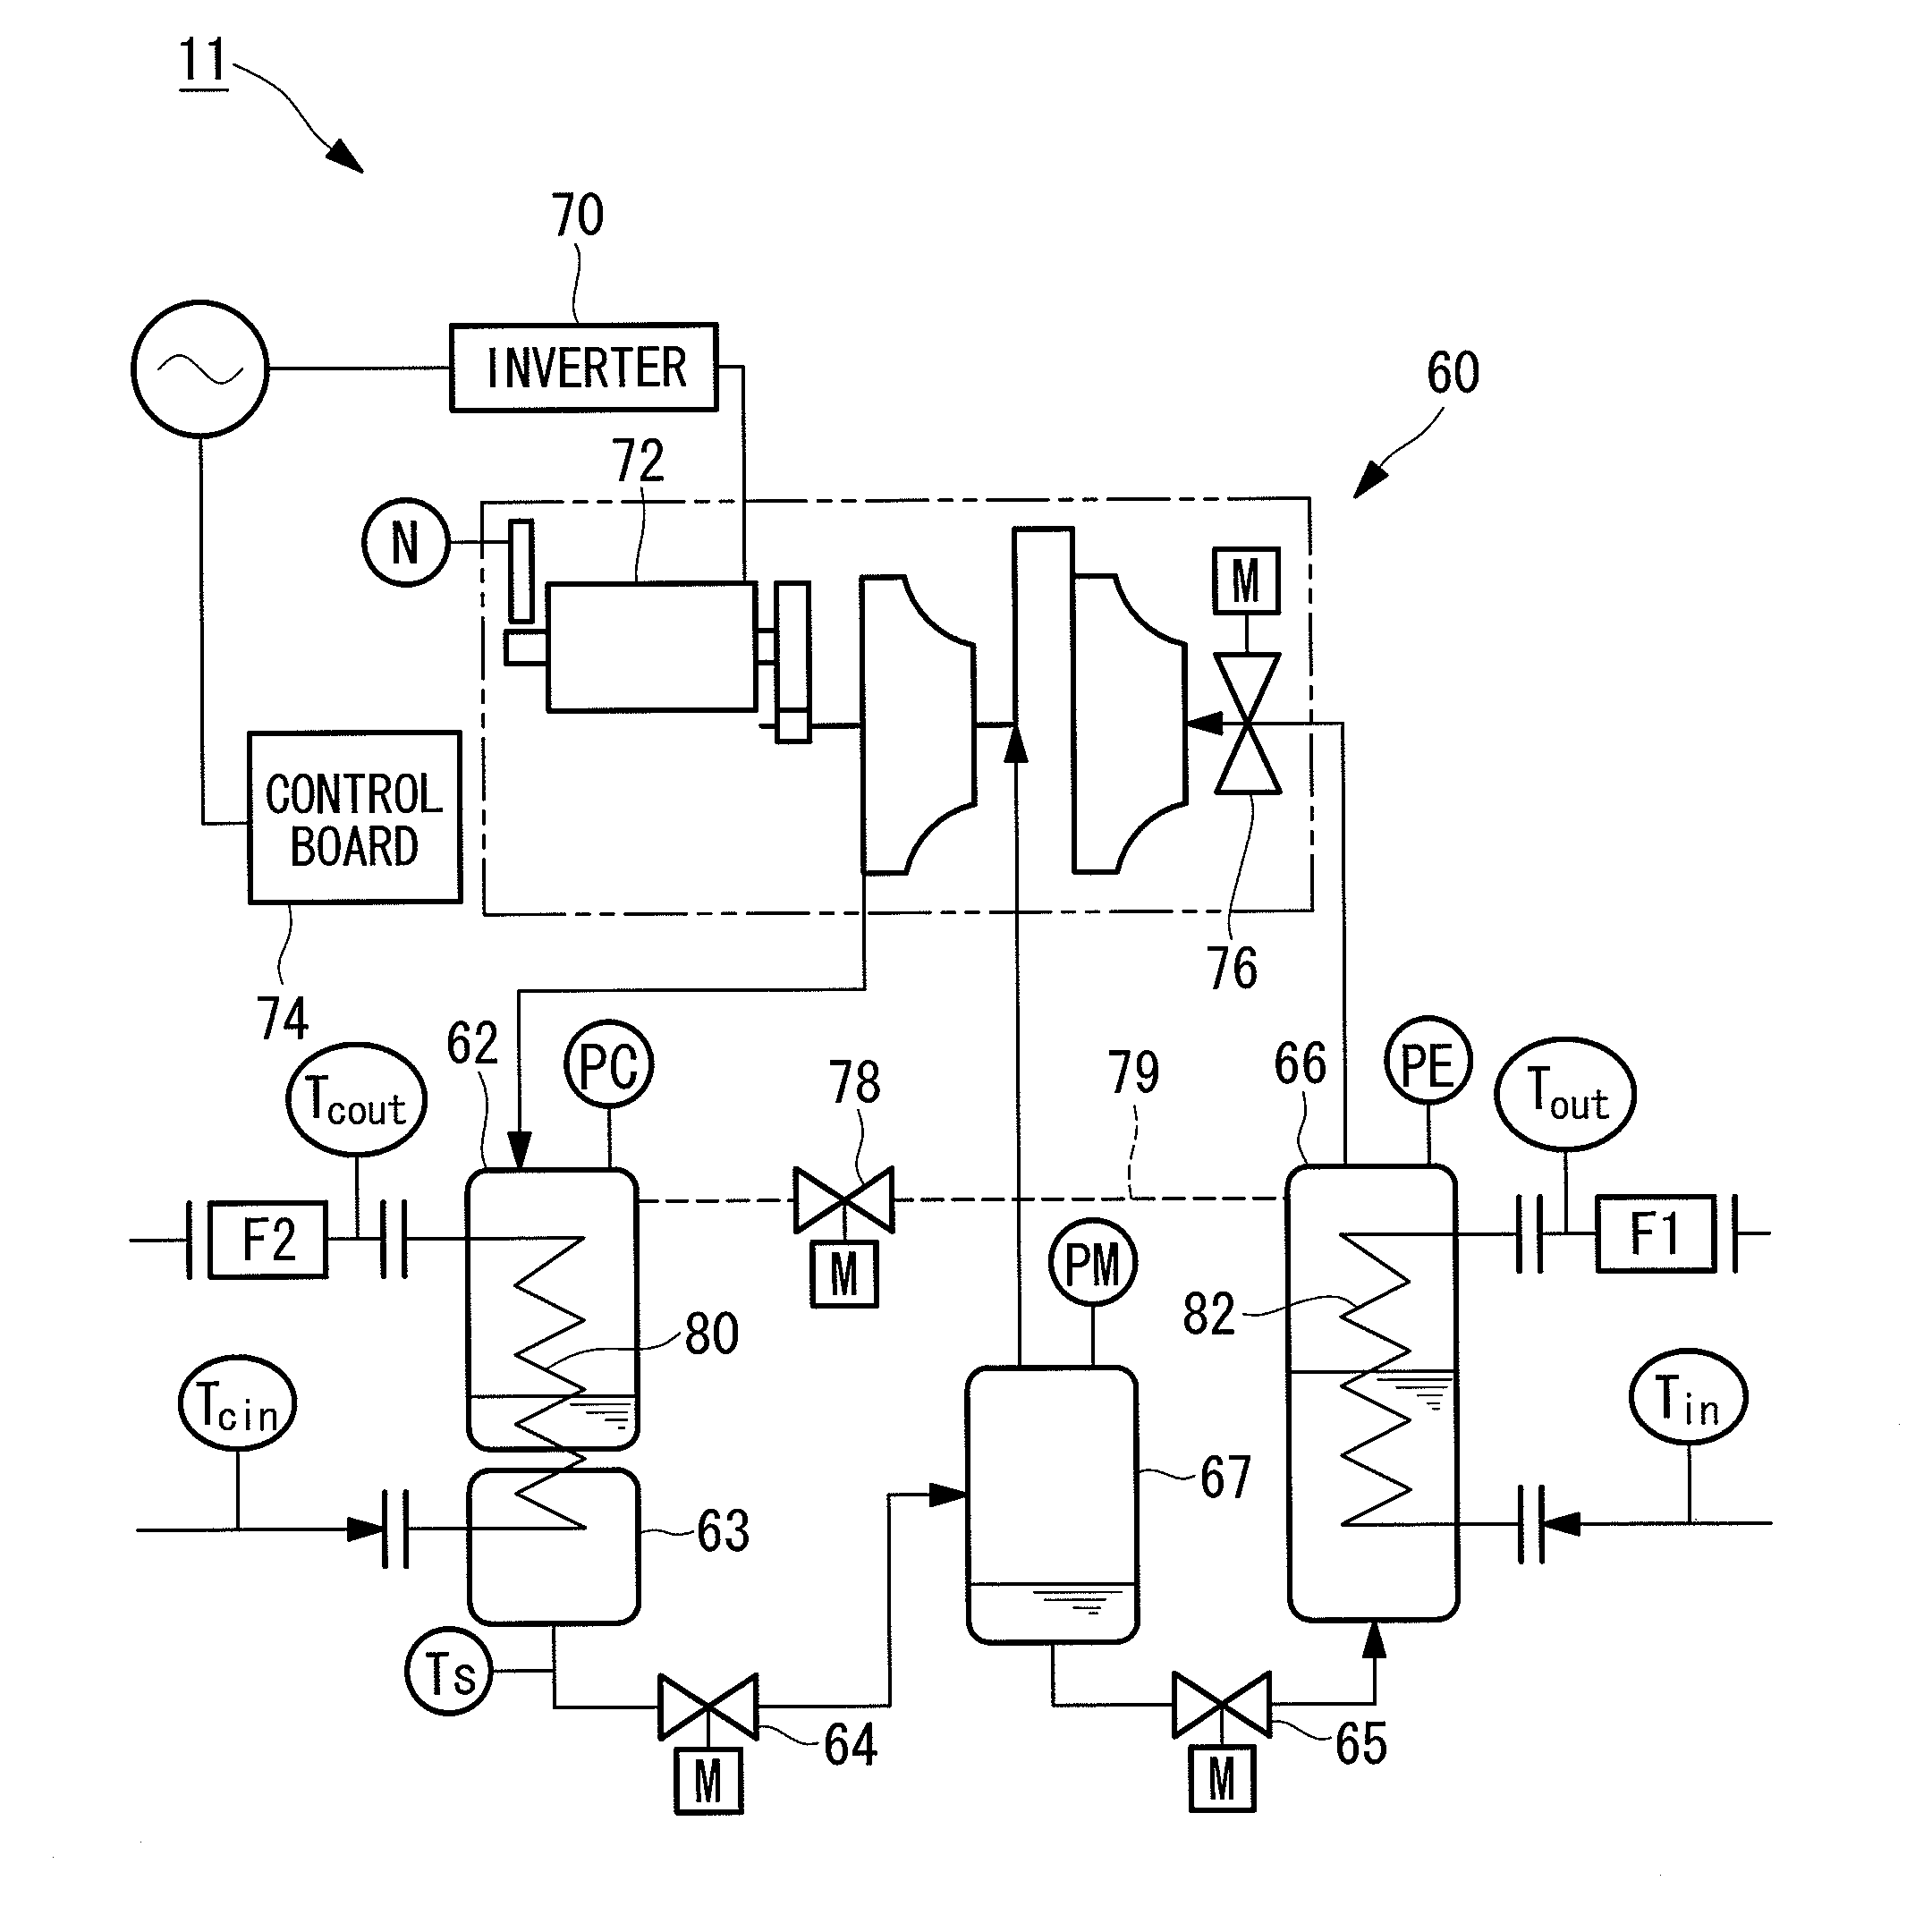 Performance evaluation device for variable-speed centrifugal chiller